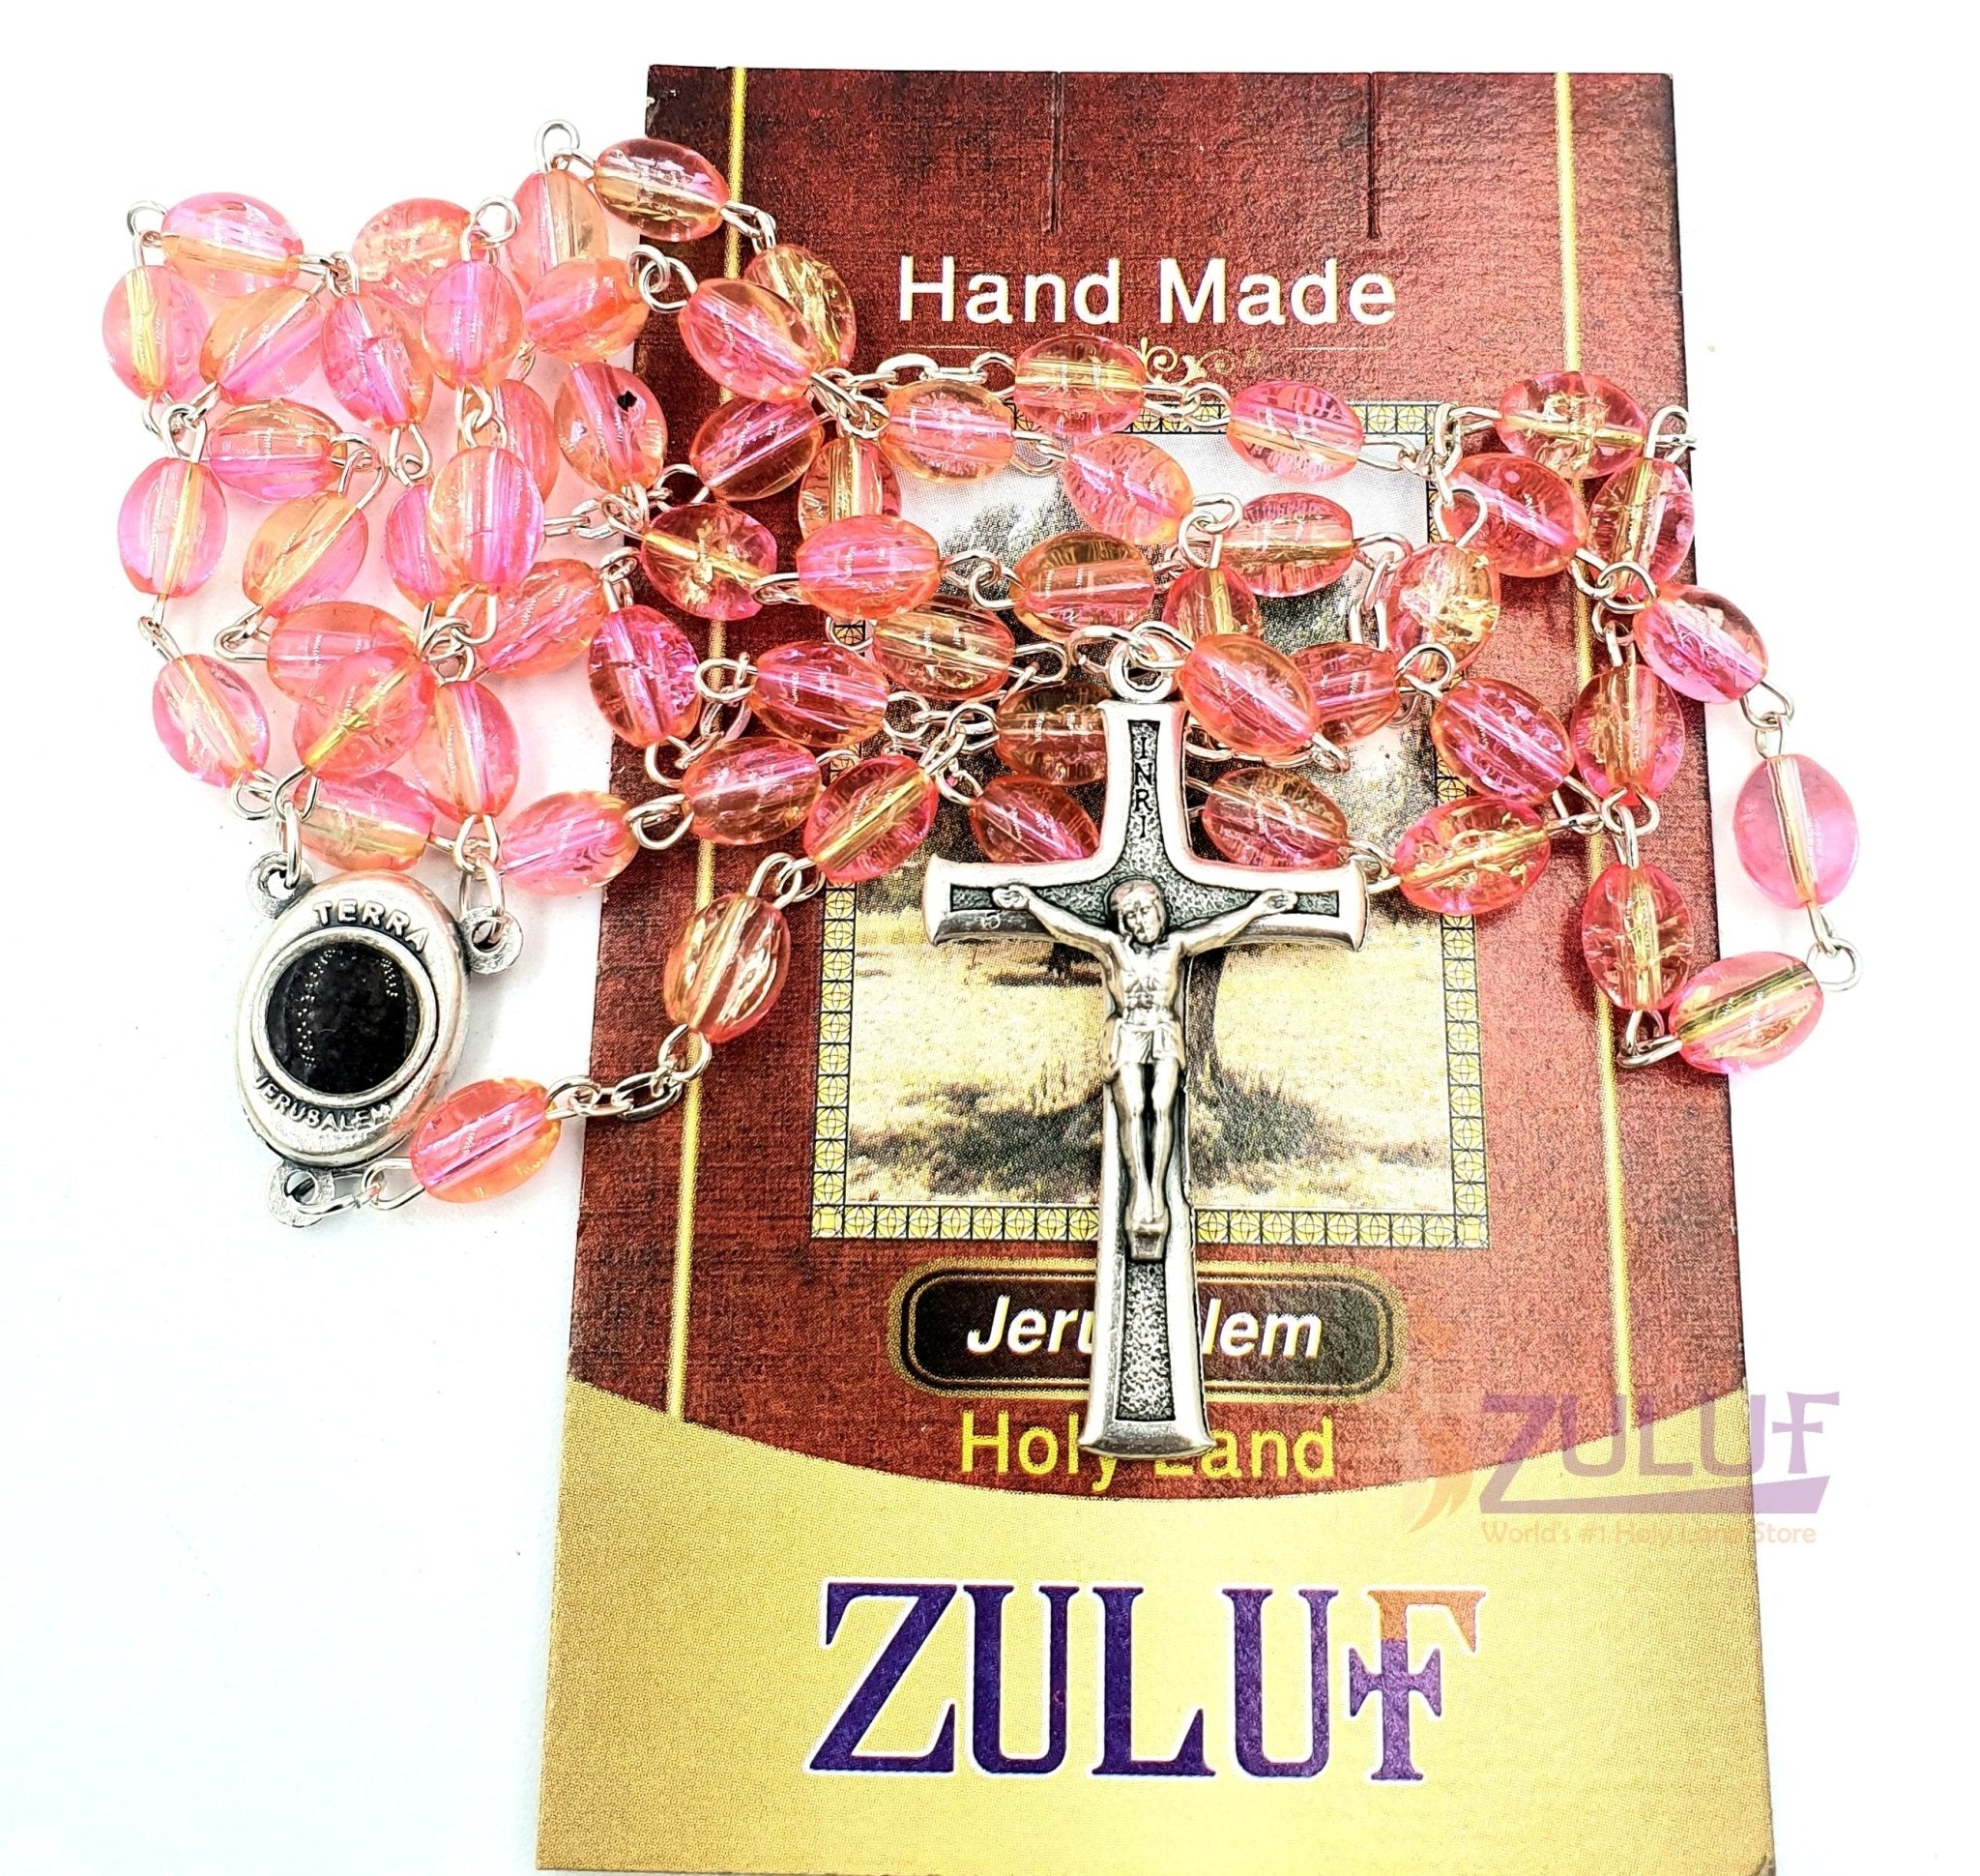 Pink Crystal Beads Rosary Catholic Necklace Holy Soil Medal & Crucifix - ROS034 - Zuluf